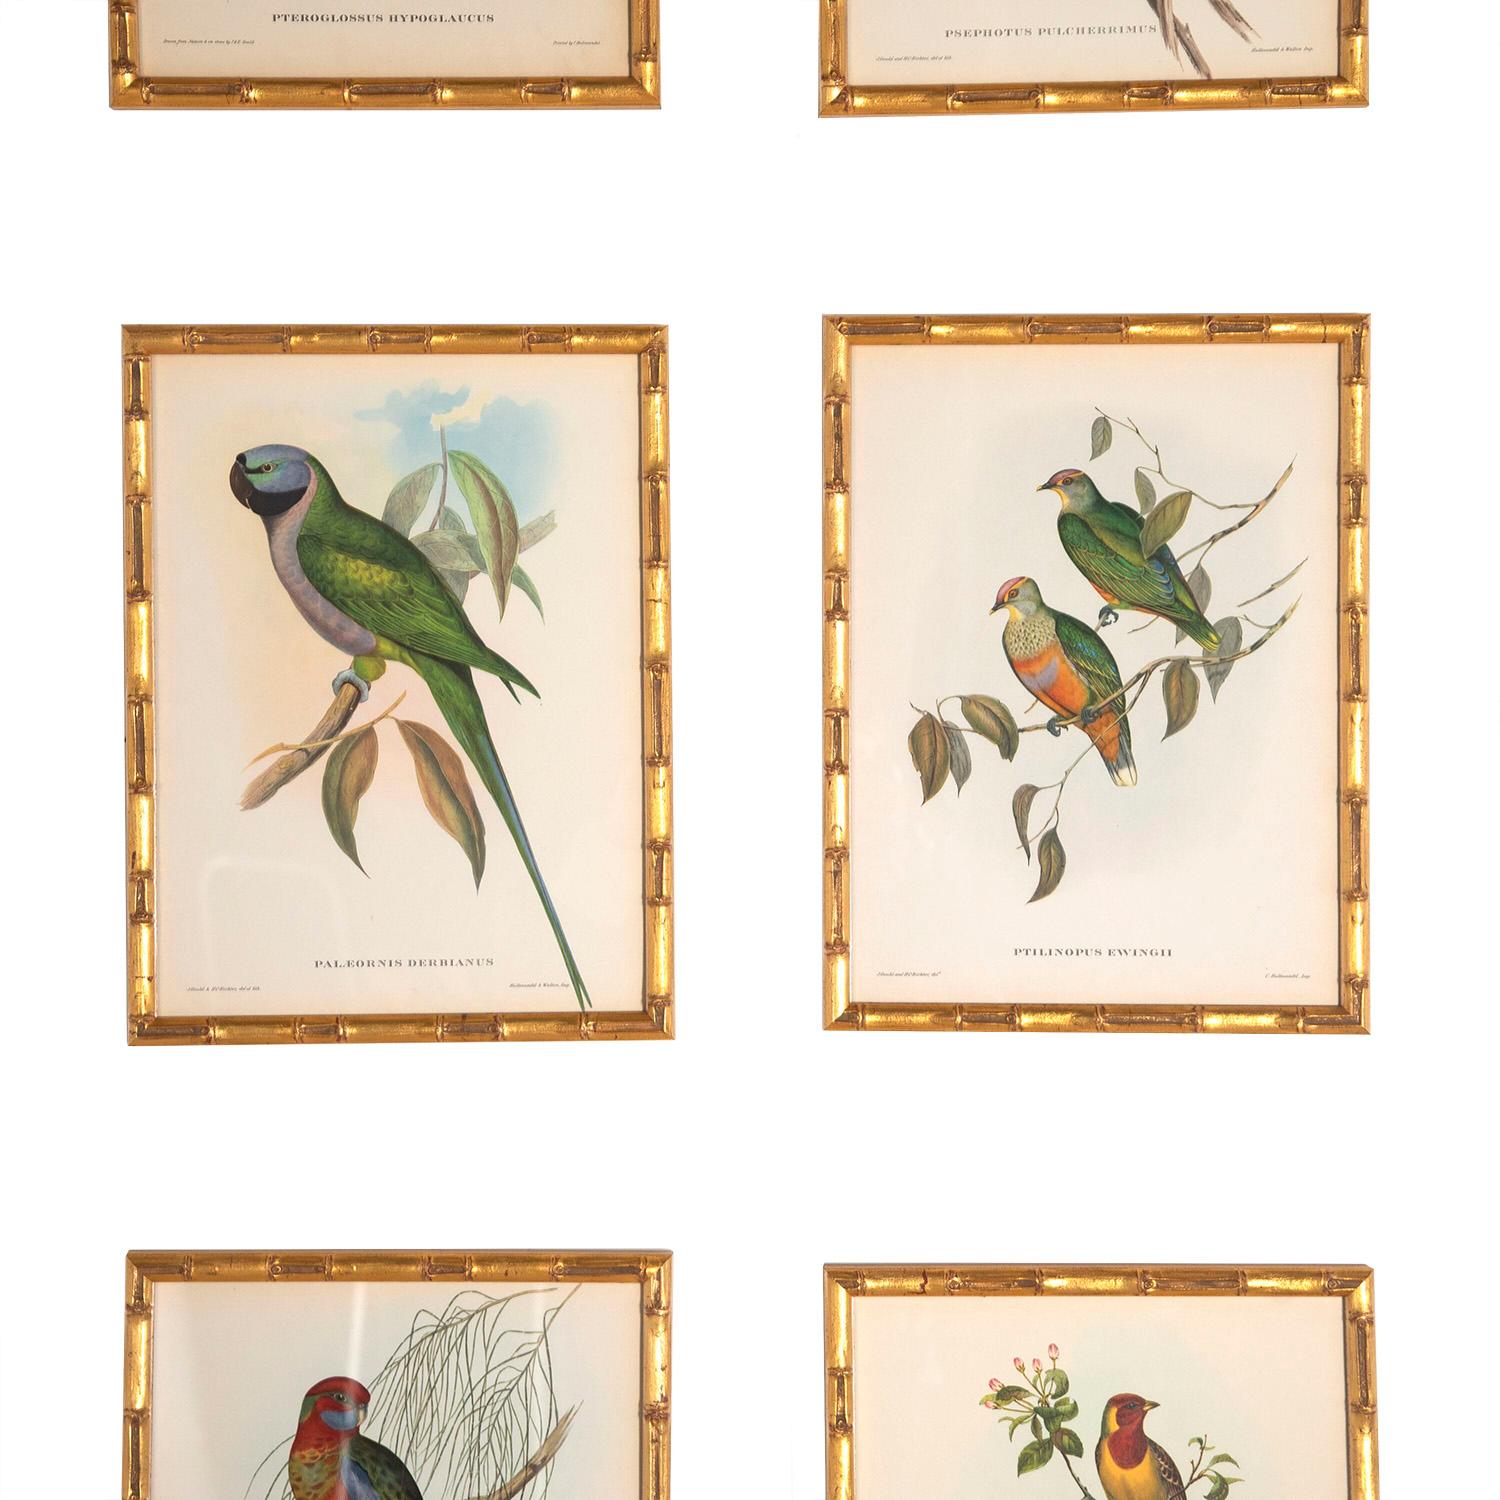 A fine set of 9 lithographs from 1955 edition of Tropical Birds by J Gould, lithographs by C Hullmandel. Presented in bespoke handmade gilt bamboo frames behind Tru Vu glass which affords the prints some protection.